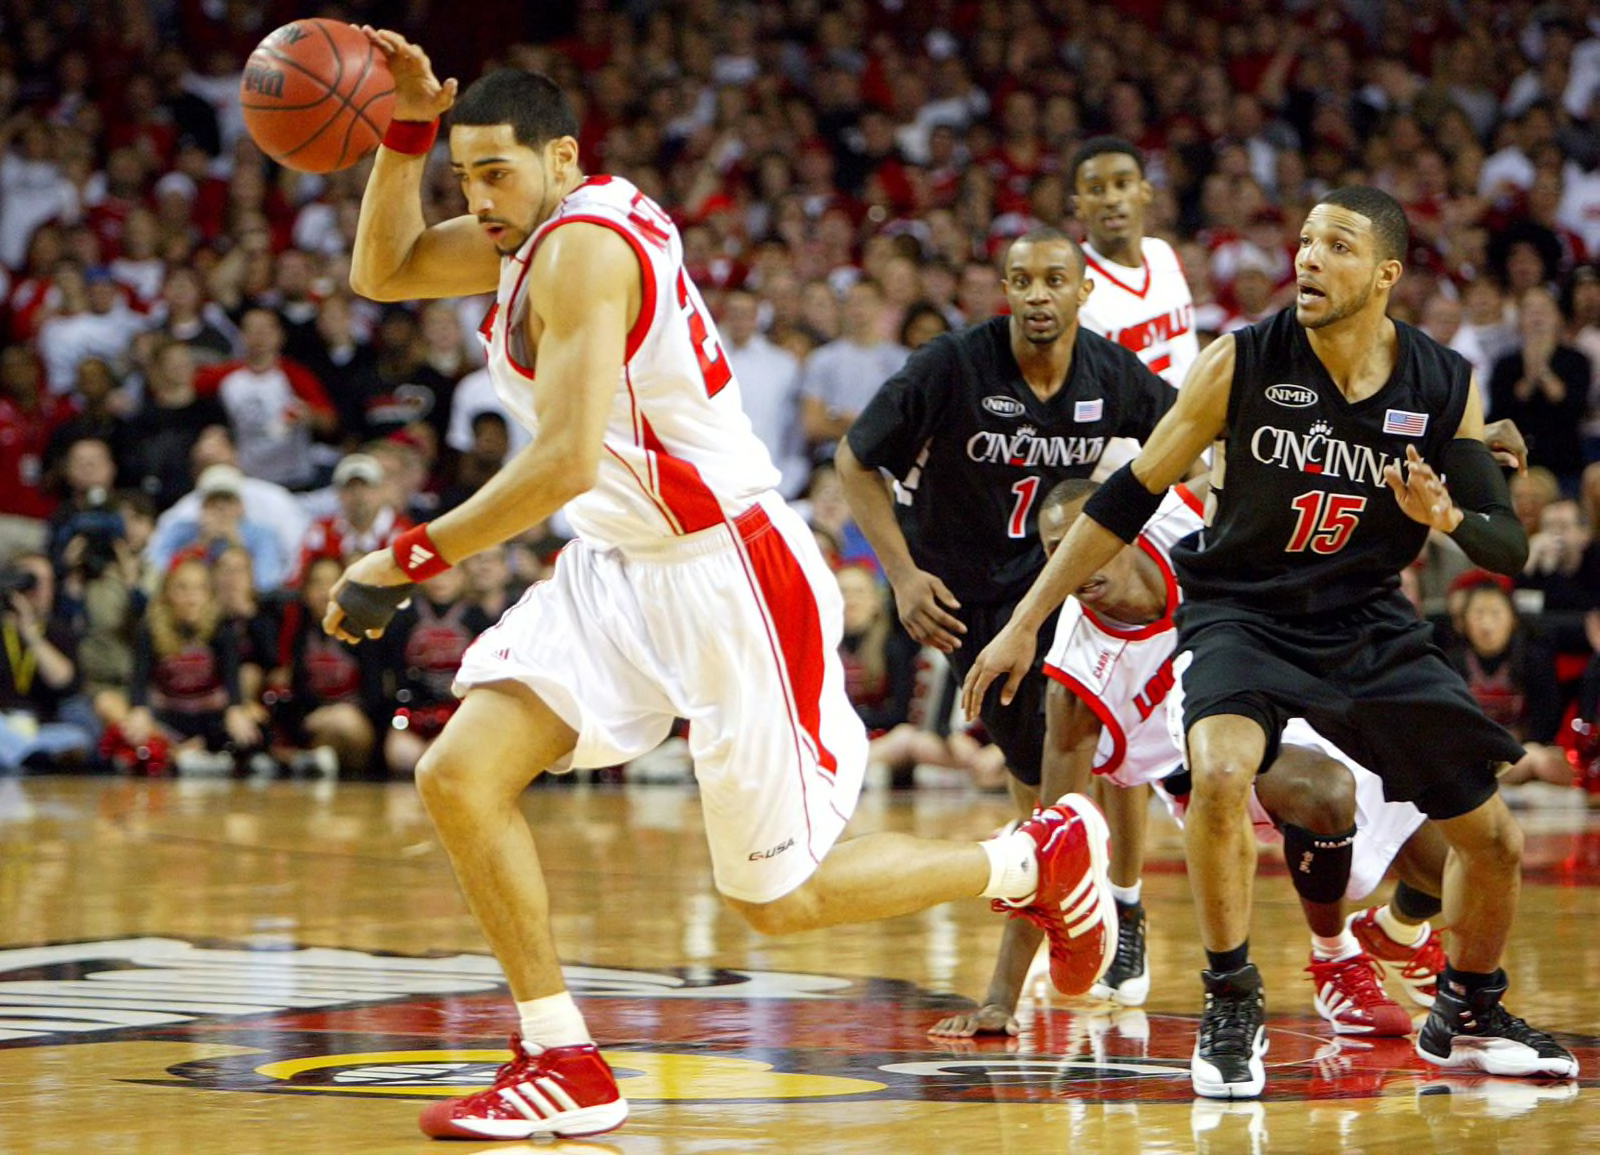 Louisville basketball: Ranking the top 100 players of all time - Page 2